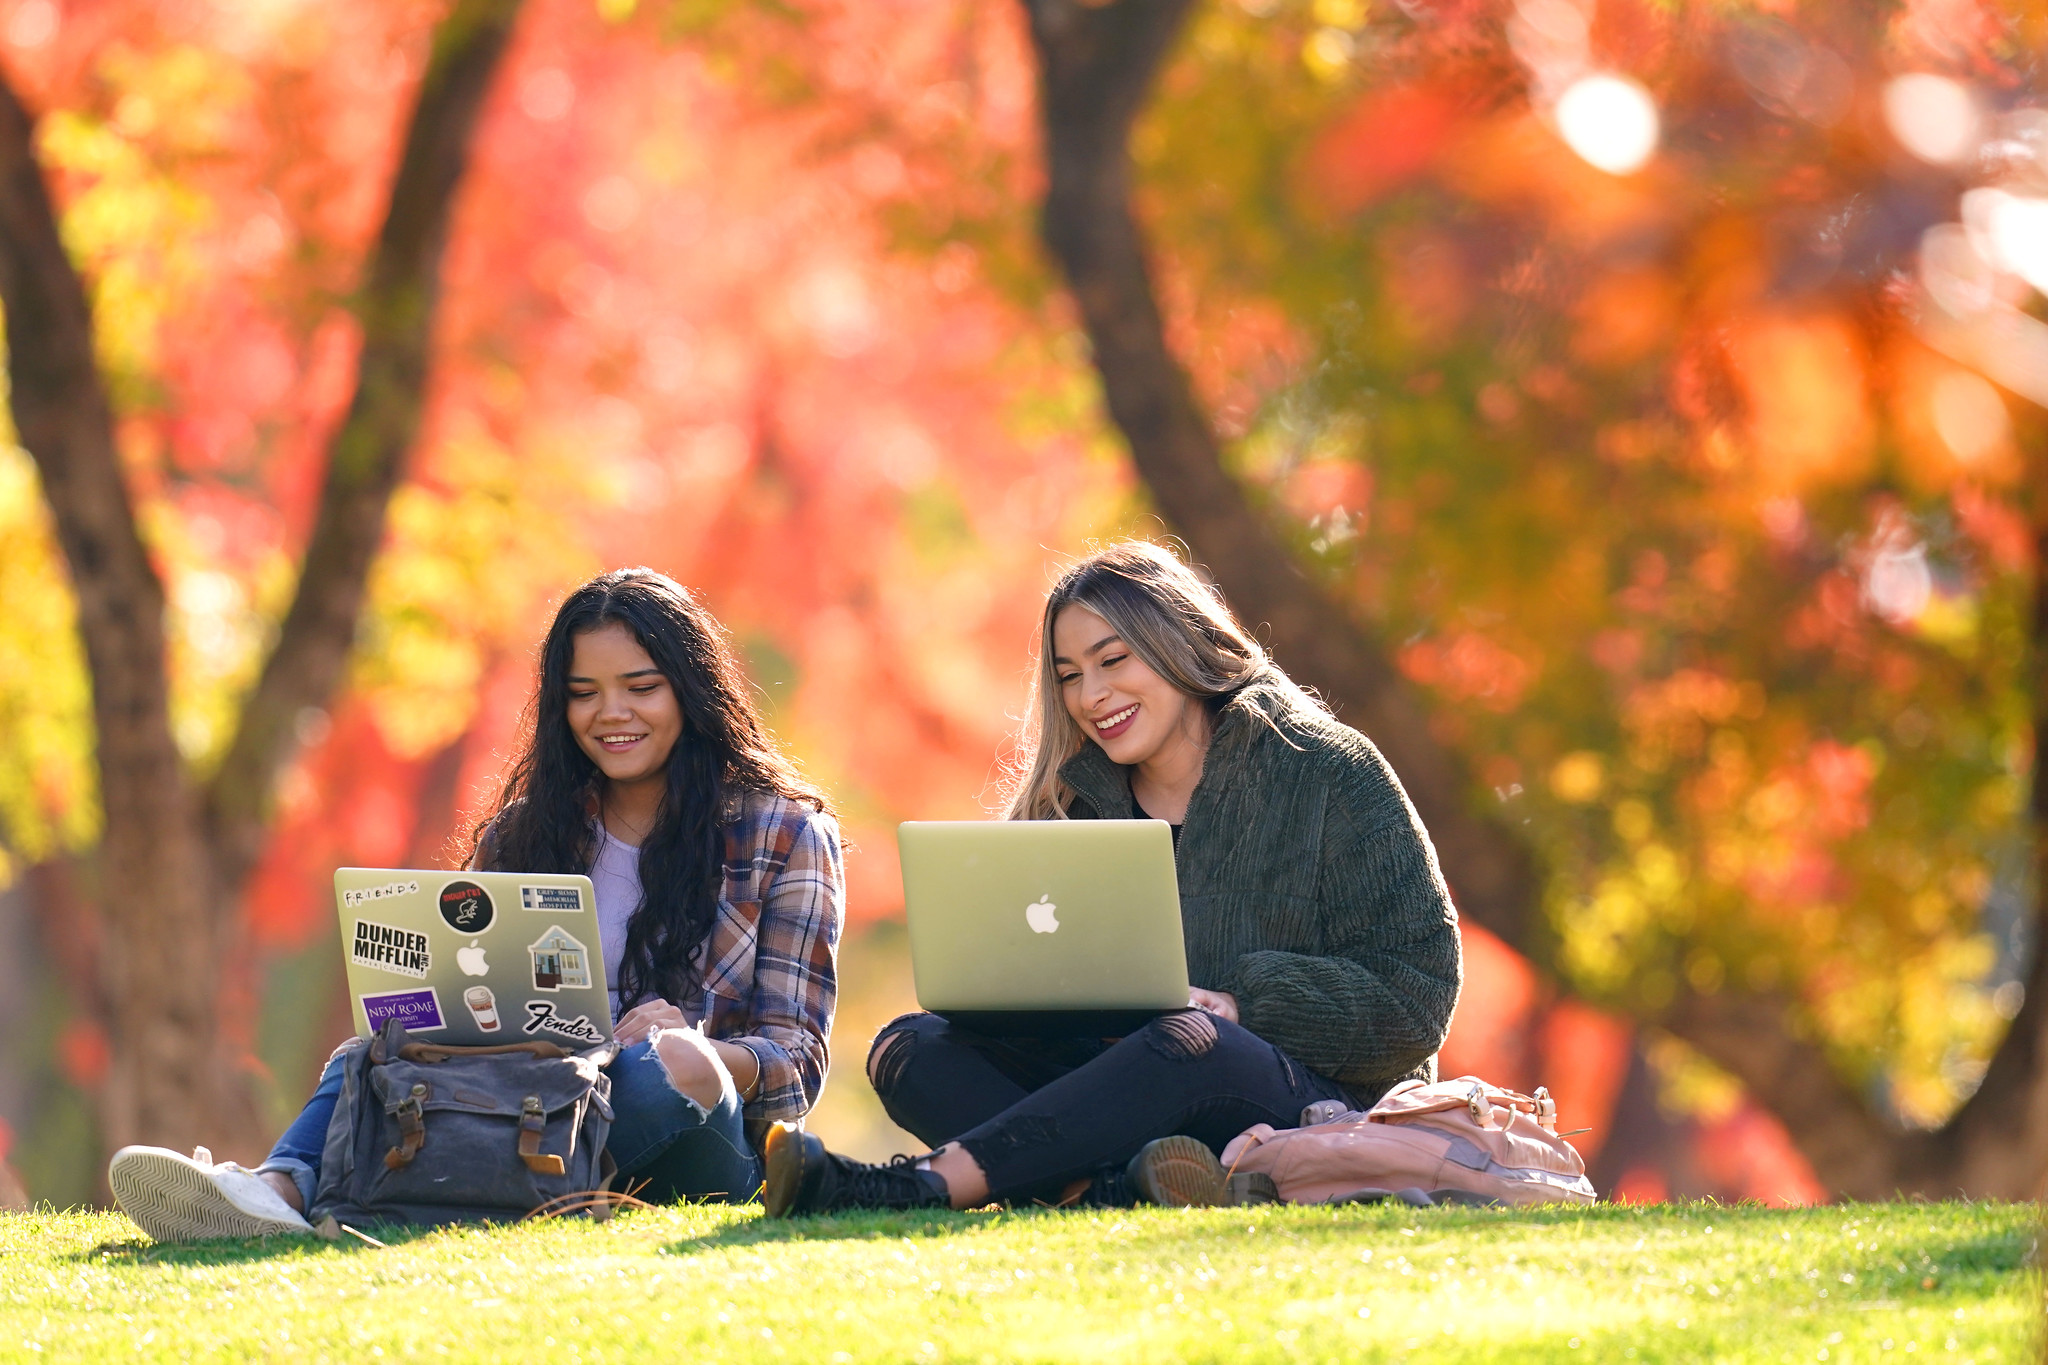 two young women sitting outside on grass with laptops, fall leaves in the background 